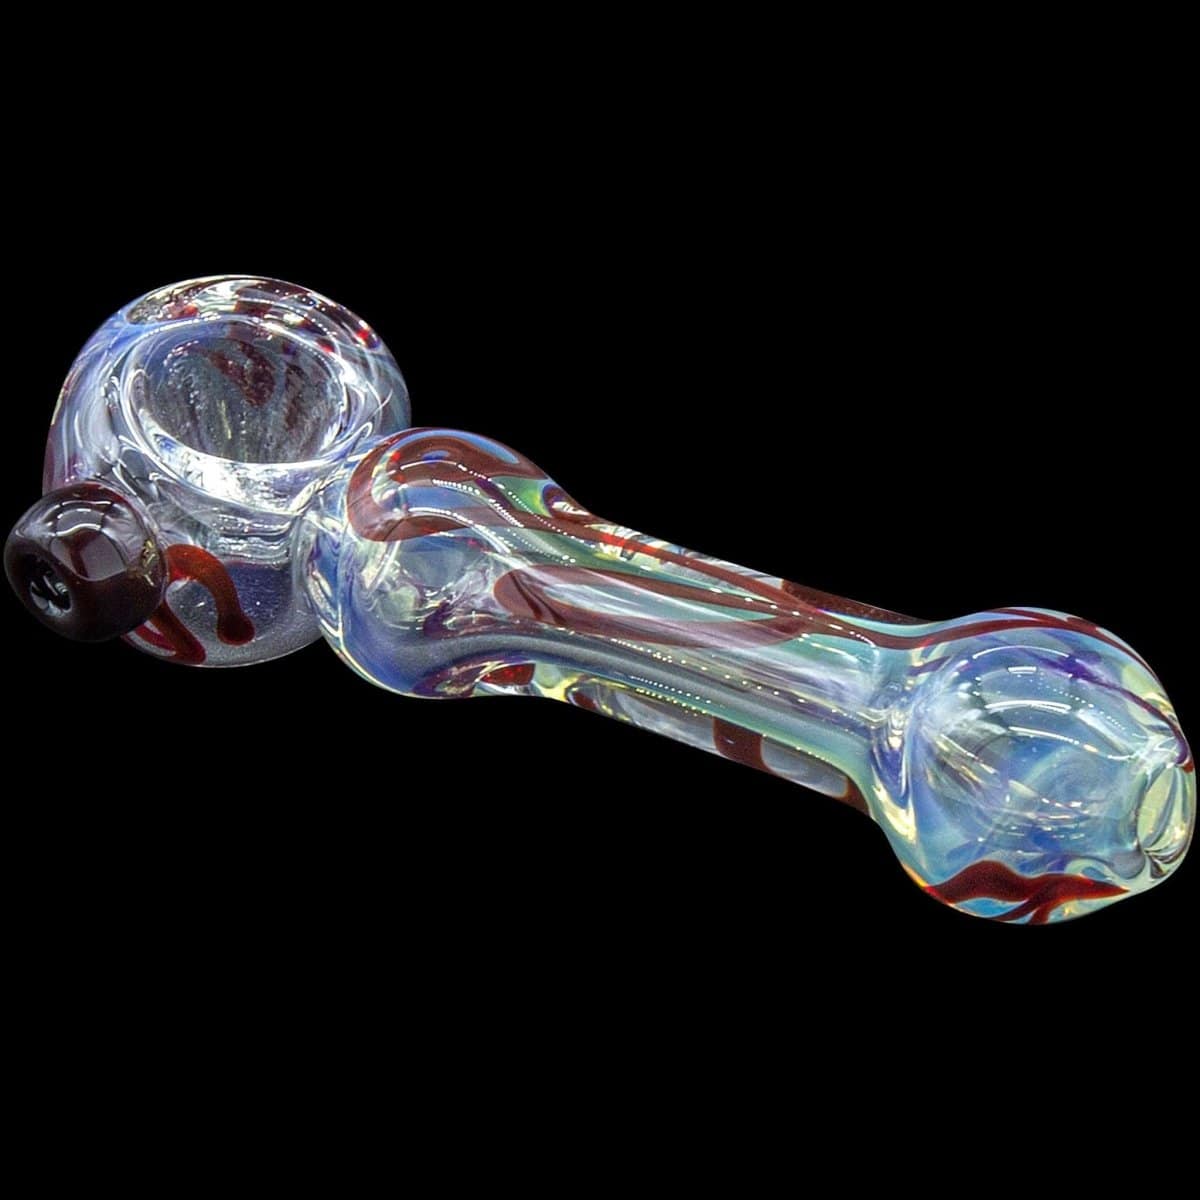 LA Pipes Hand Pipe Ruby Red "Painted Warrior Spoon" Glass Pipe